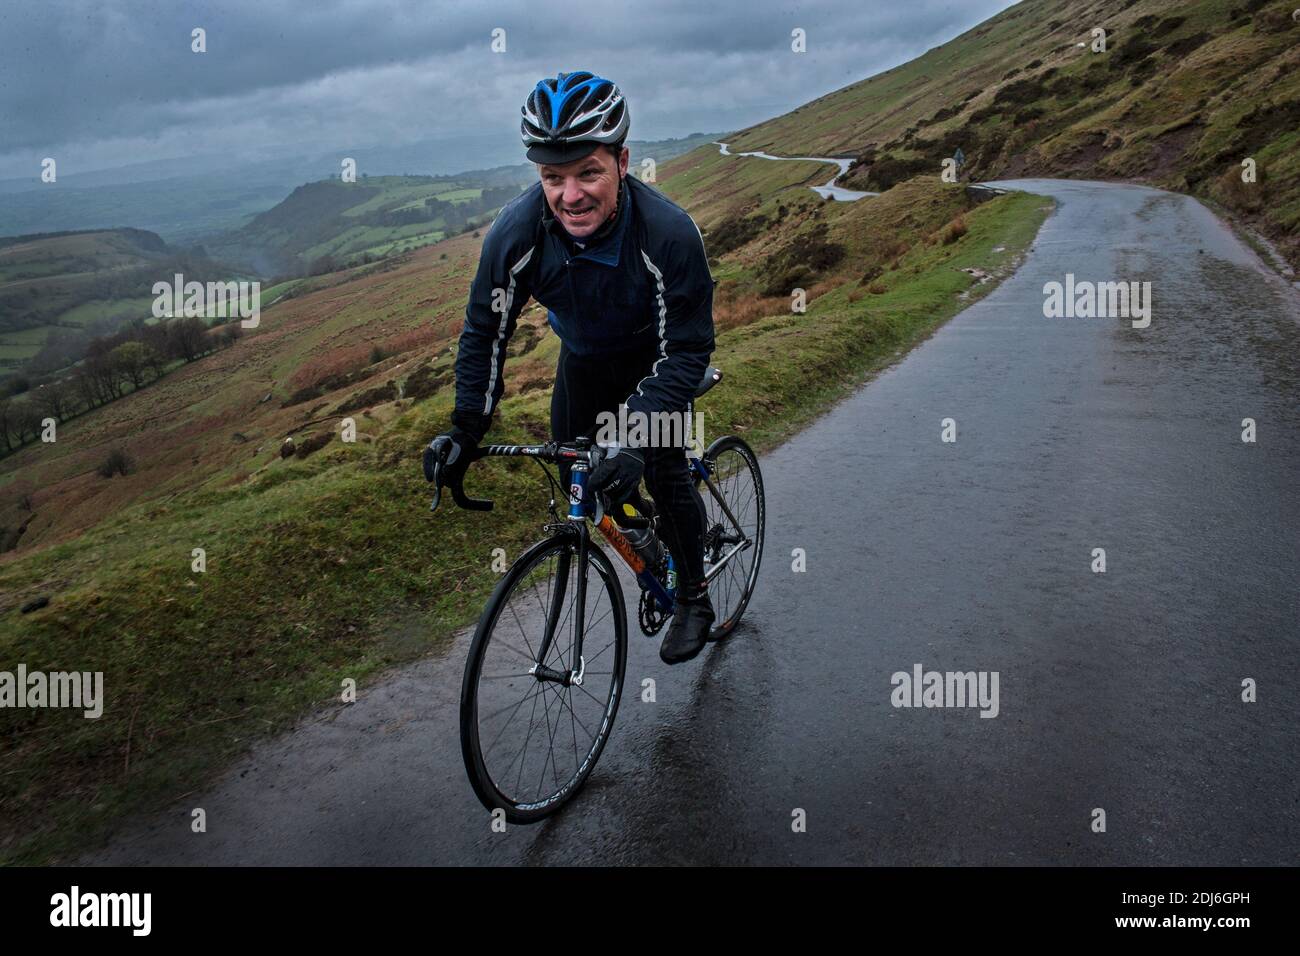 Black Mountains Cycle Tour with Robert Penn (author of It's All About the Bike) in Brecon Beacons National Park in Monmouthshire, south east Wales. Stock Photo